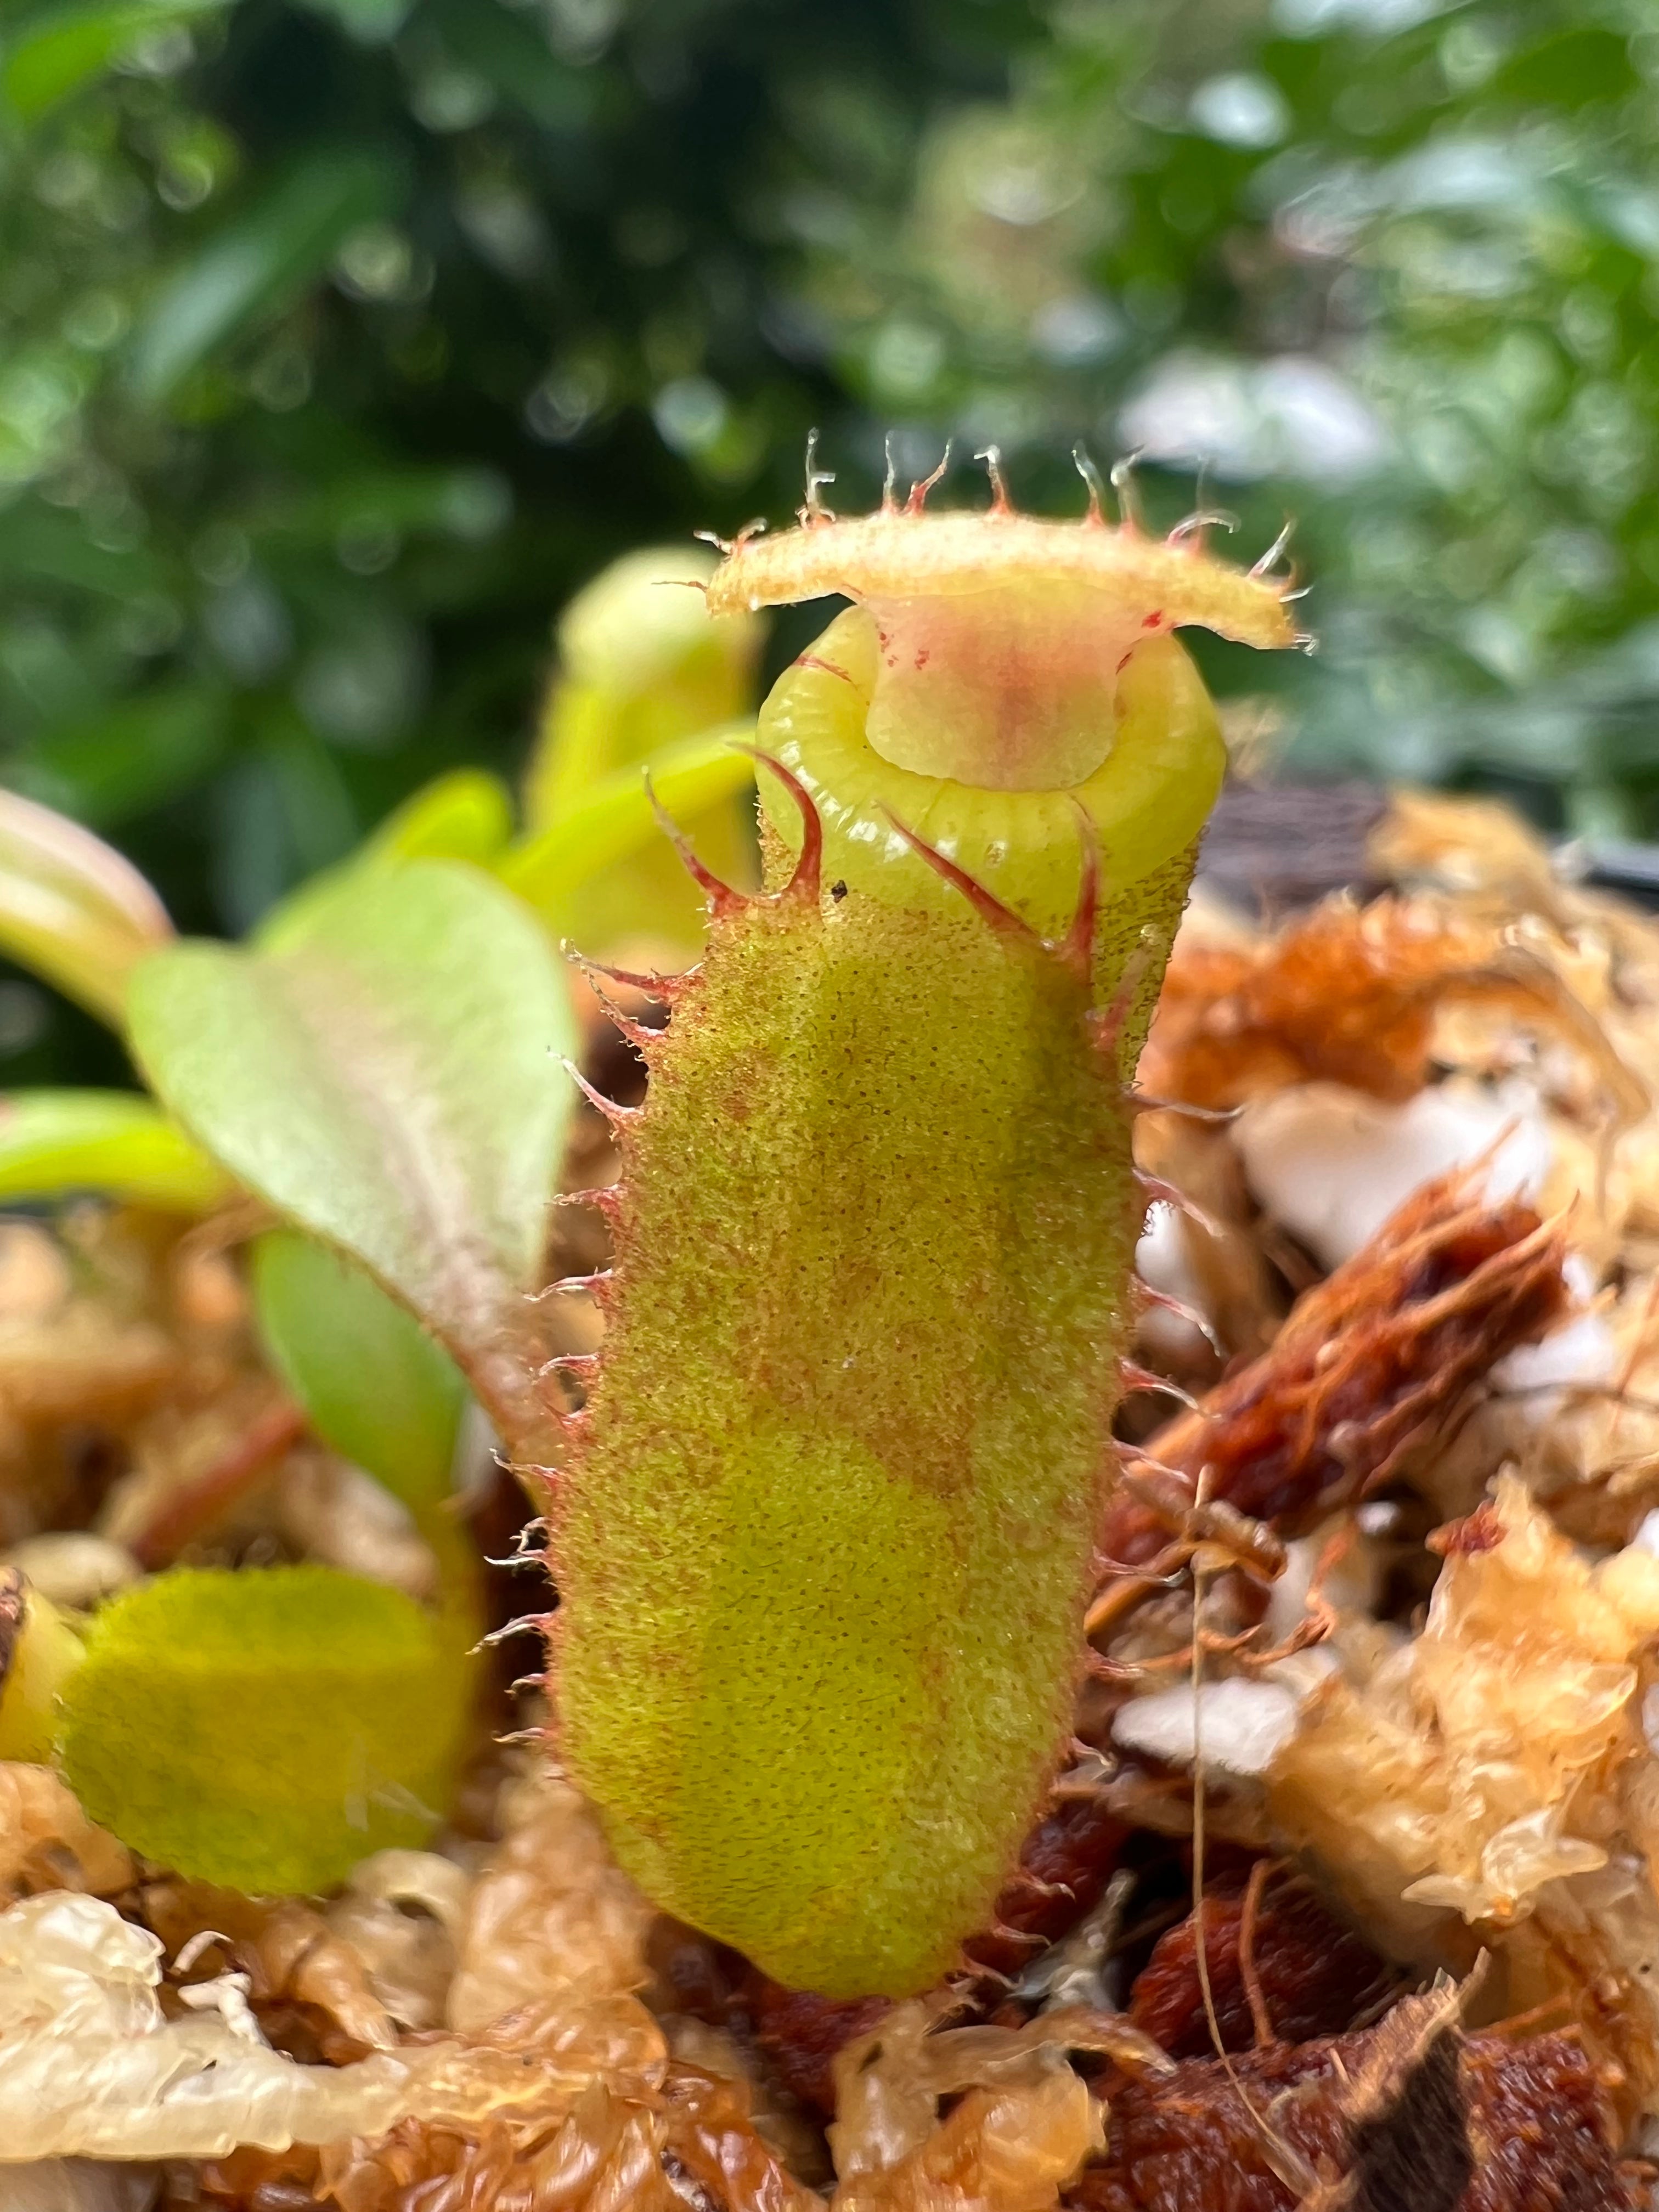 Nepenthes vetchii x N. dubia “Red” Seed Grown